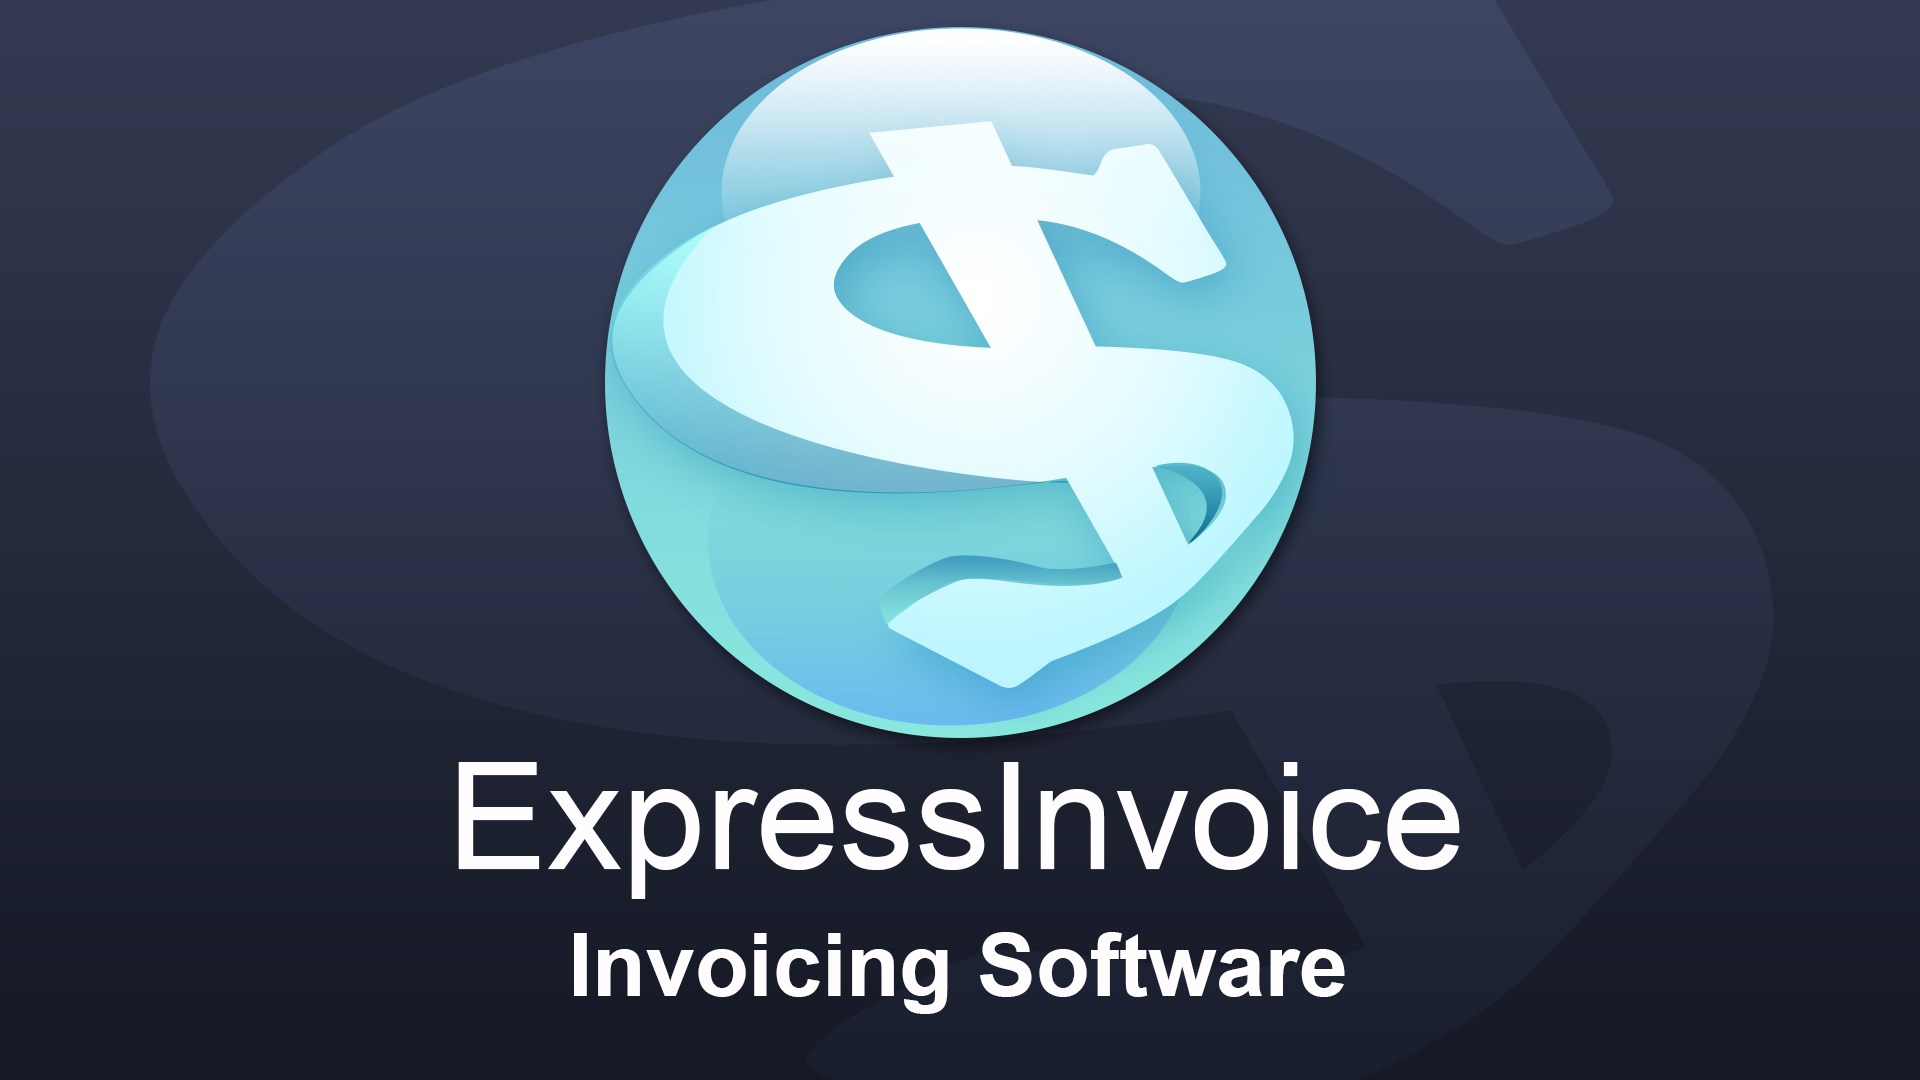 NCH: Express Invoice Invoicing Key, 203.62 usd